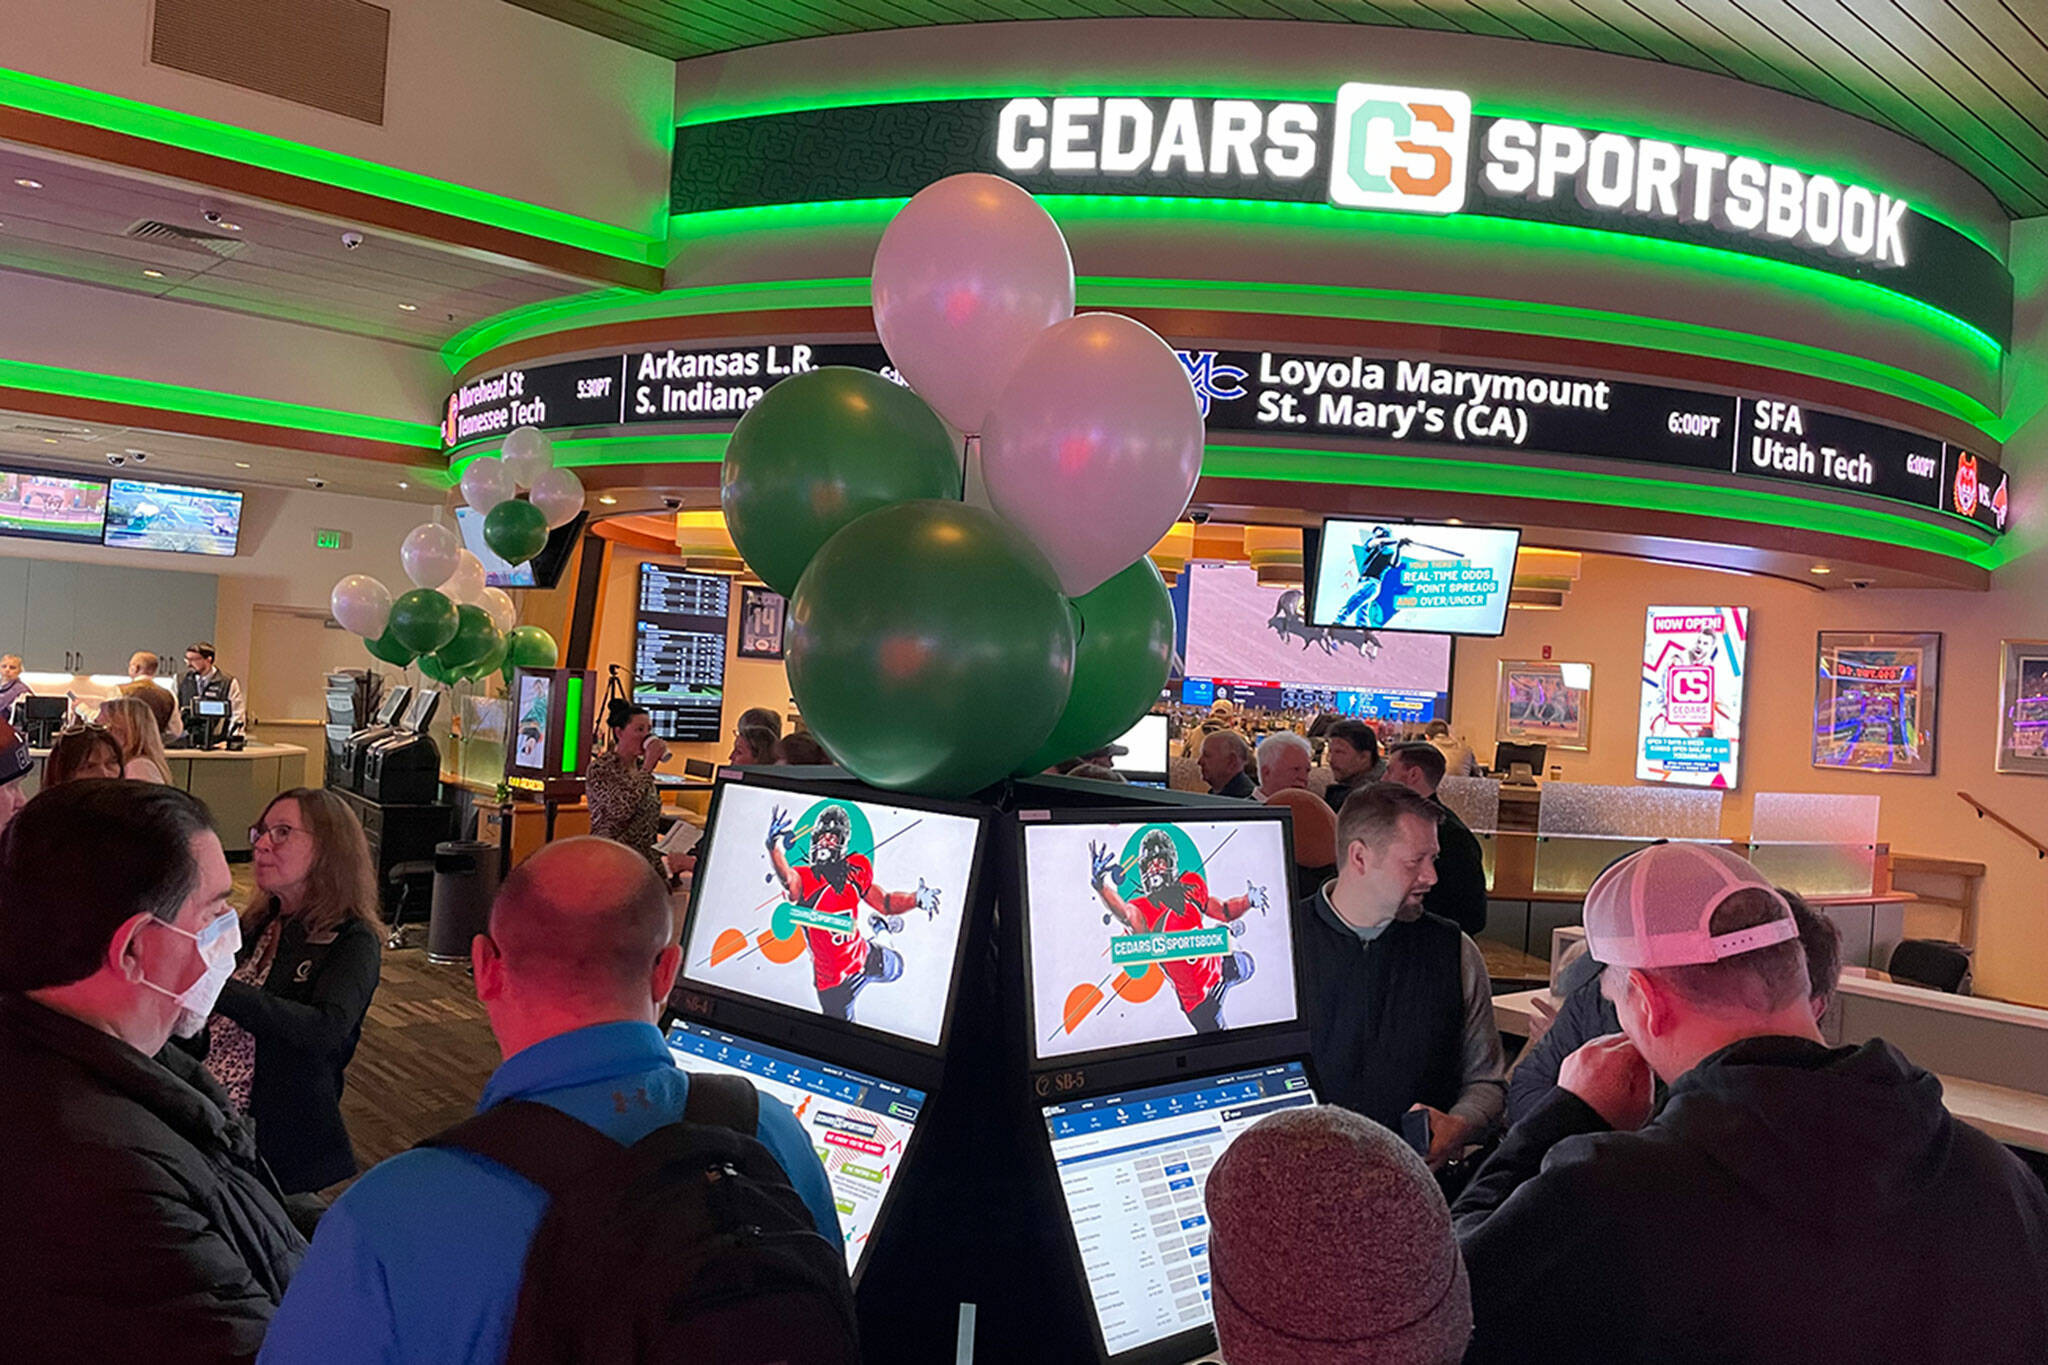 Sequim Gazette photo by Matthew Nash/ Cedars Sportsbook inside 7 Cedars Casino offers eight kiosks and two writing desks for betting on sporting events. Amenities also include large video screens, theater seating, and a scrolling marquee of schedules and scores.